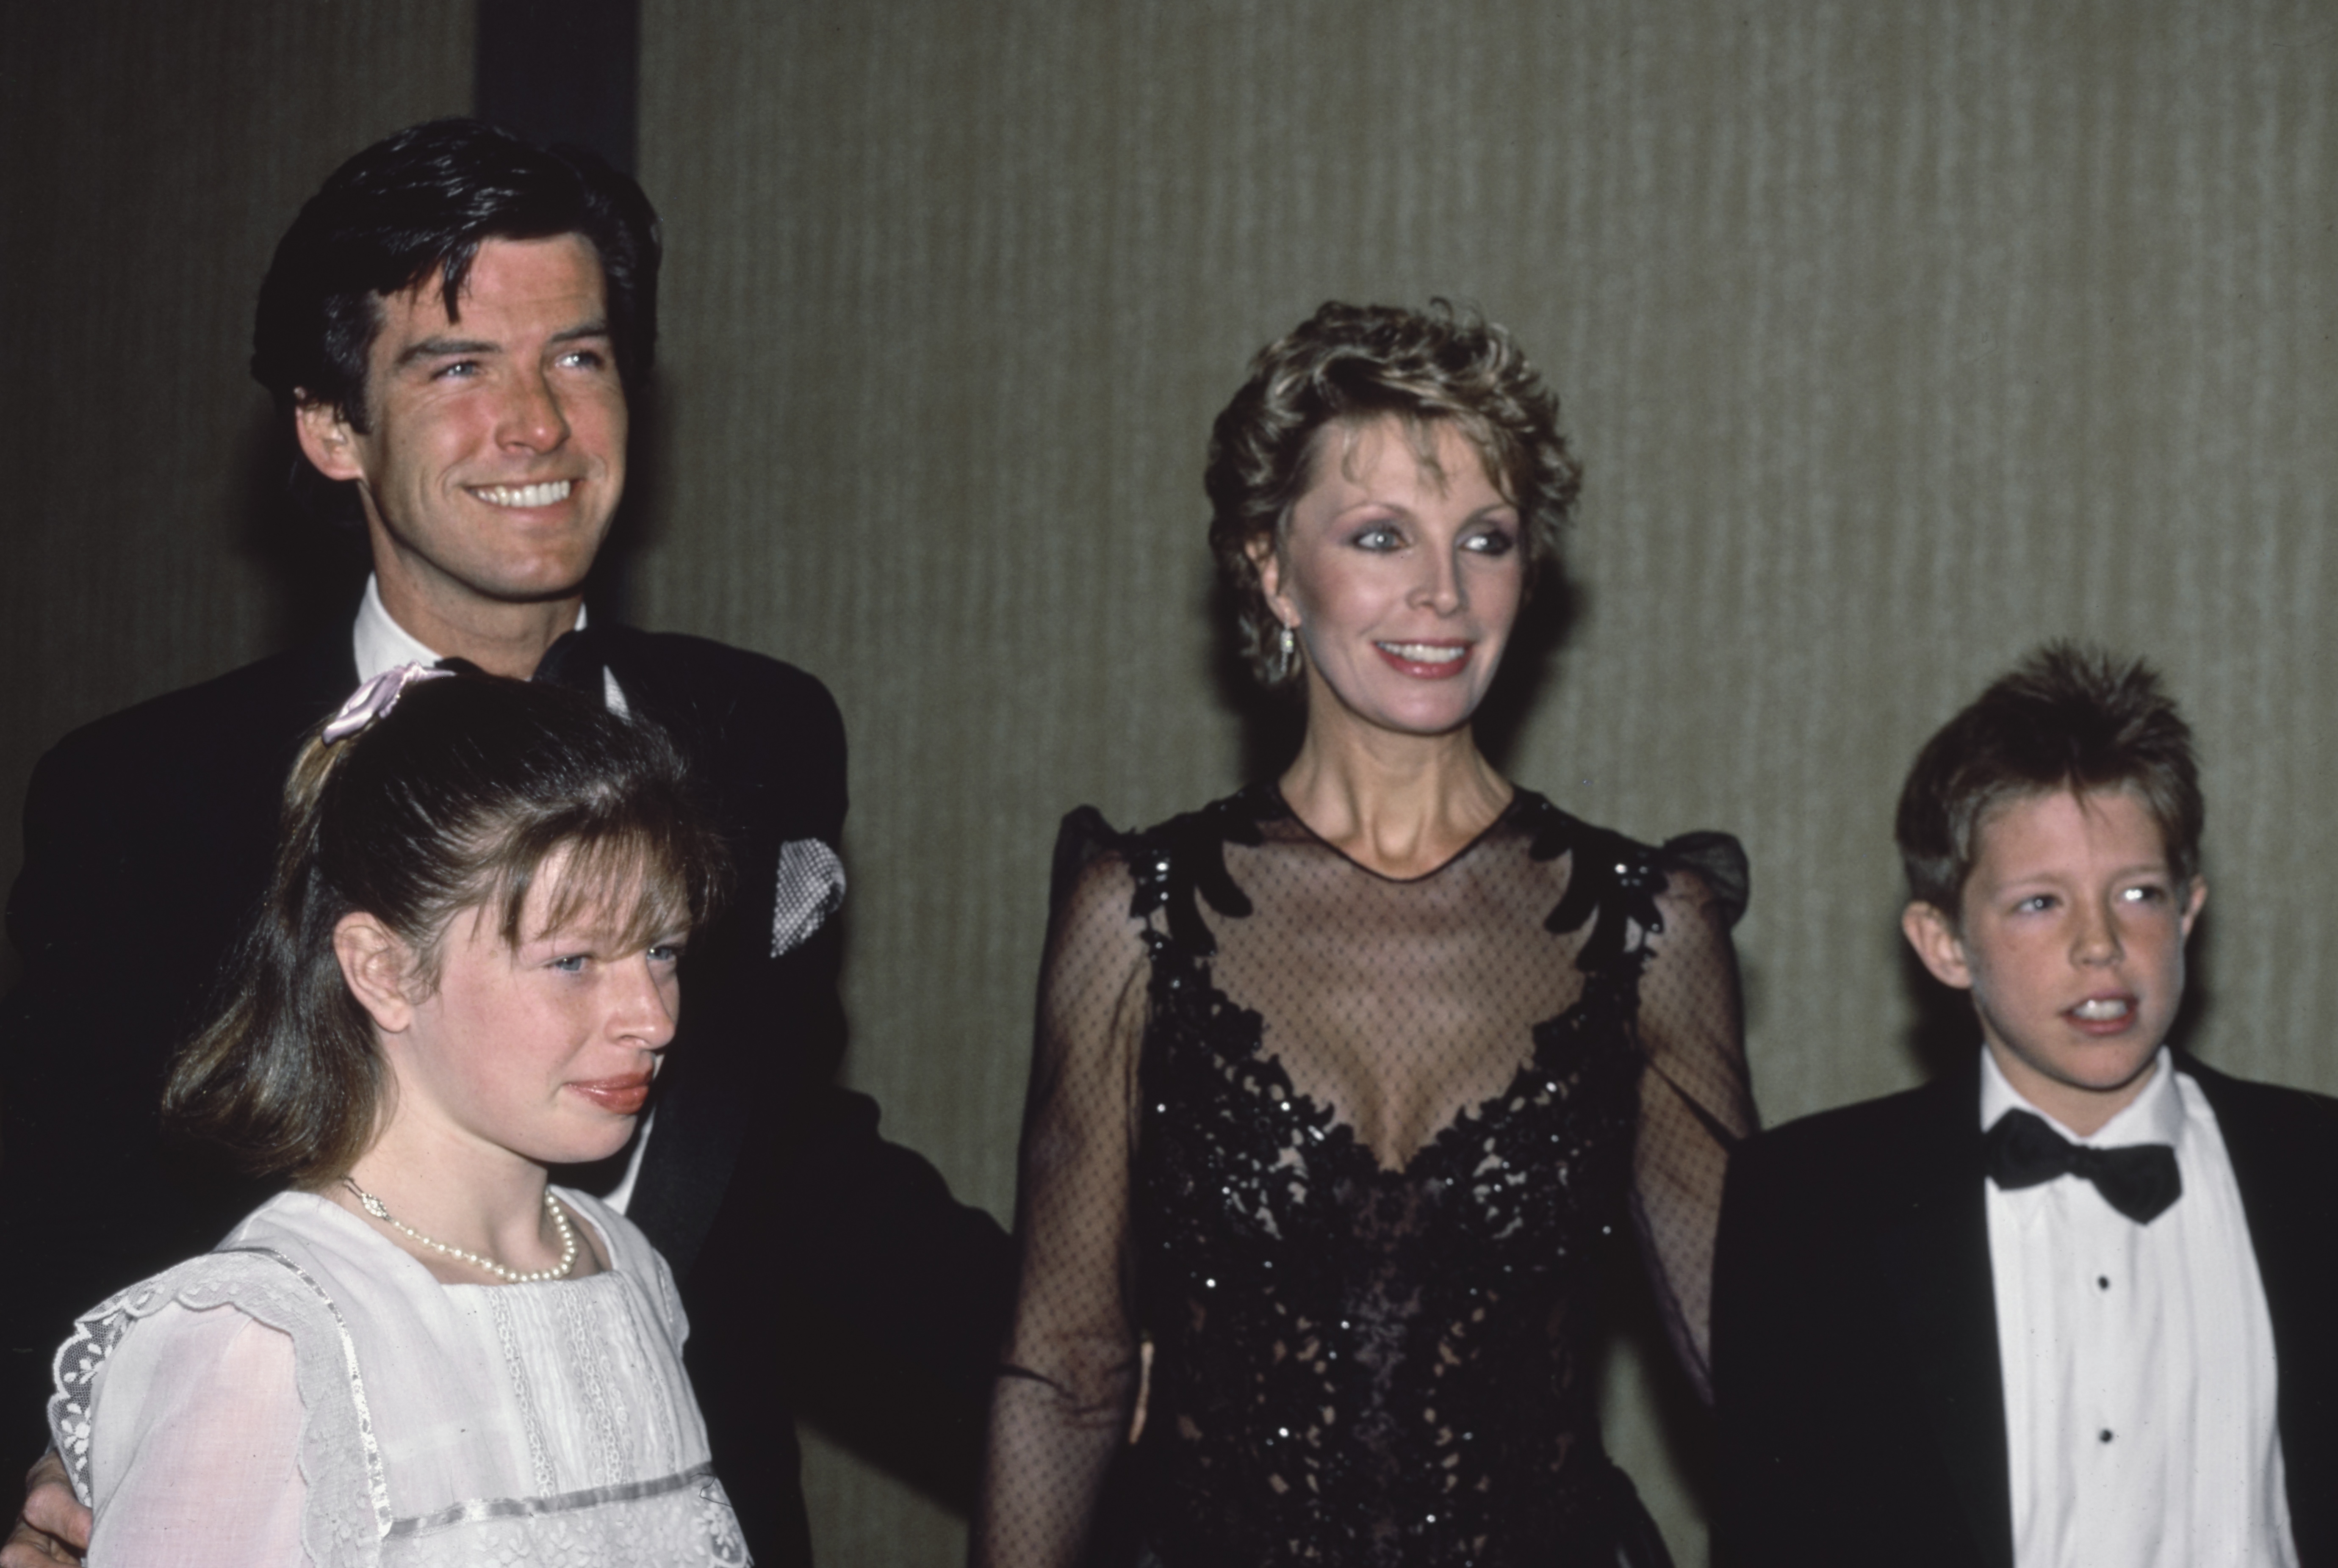 Pierce Brosnan with his late wife Cassandra Harris and their children Charlotte Harris and Christopher in Los Angeles in 1985 | Source: Getty Images,